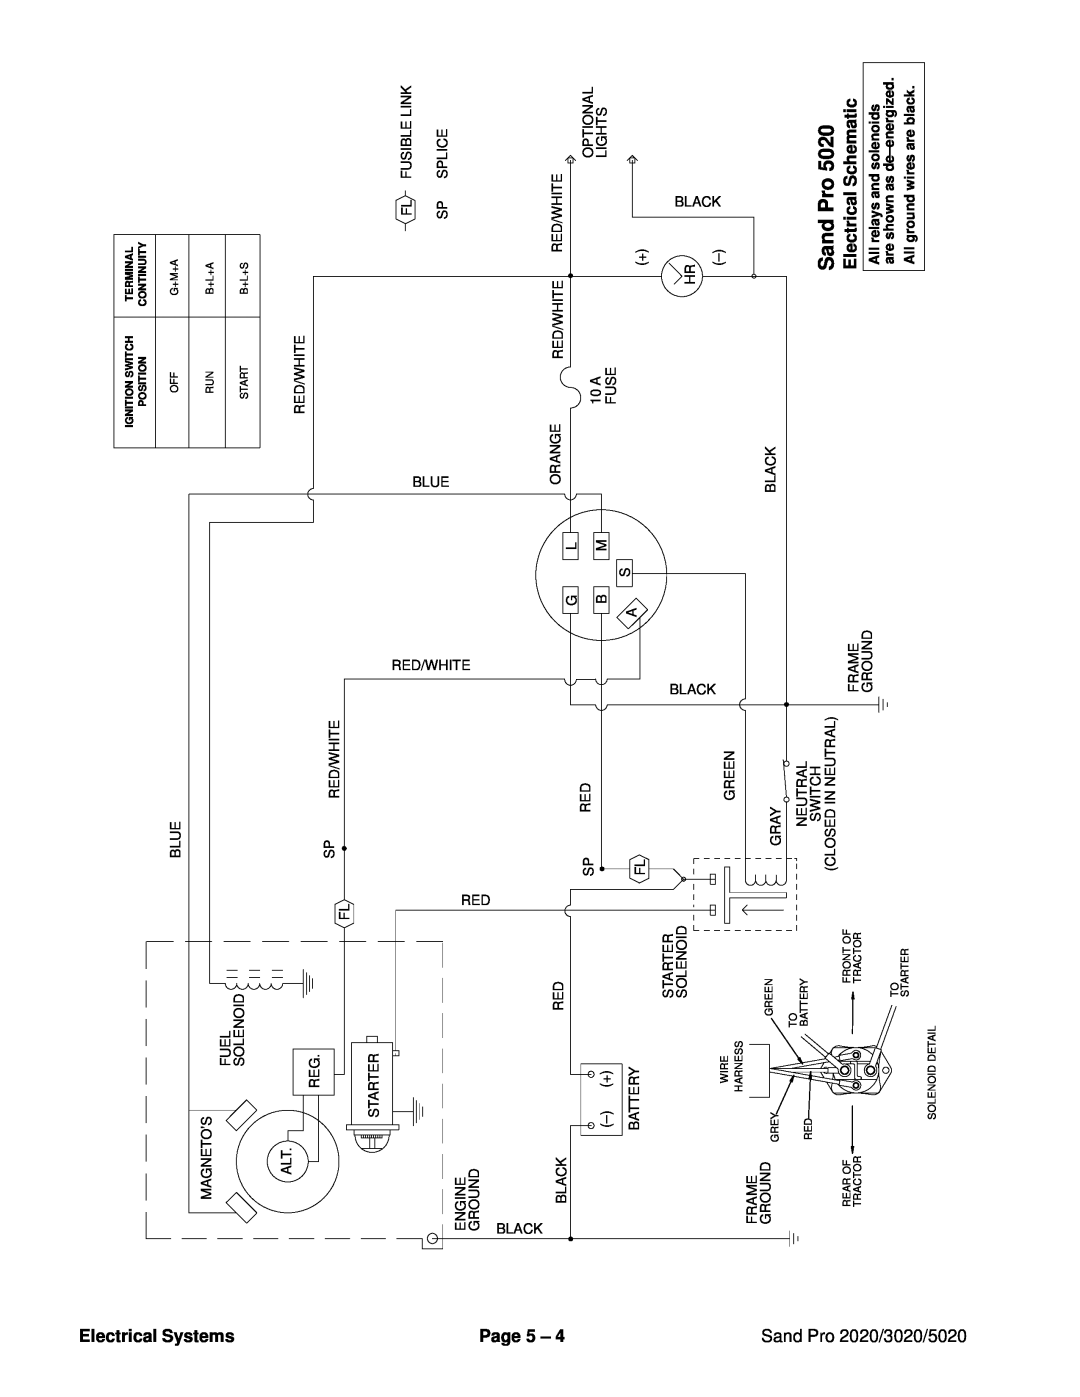 Toro 2020, 5020, 3020 service manual Sand Pro, Electrical Systems Page 5, Electrical Schematic, Black, Gray 